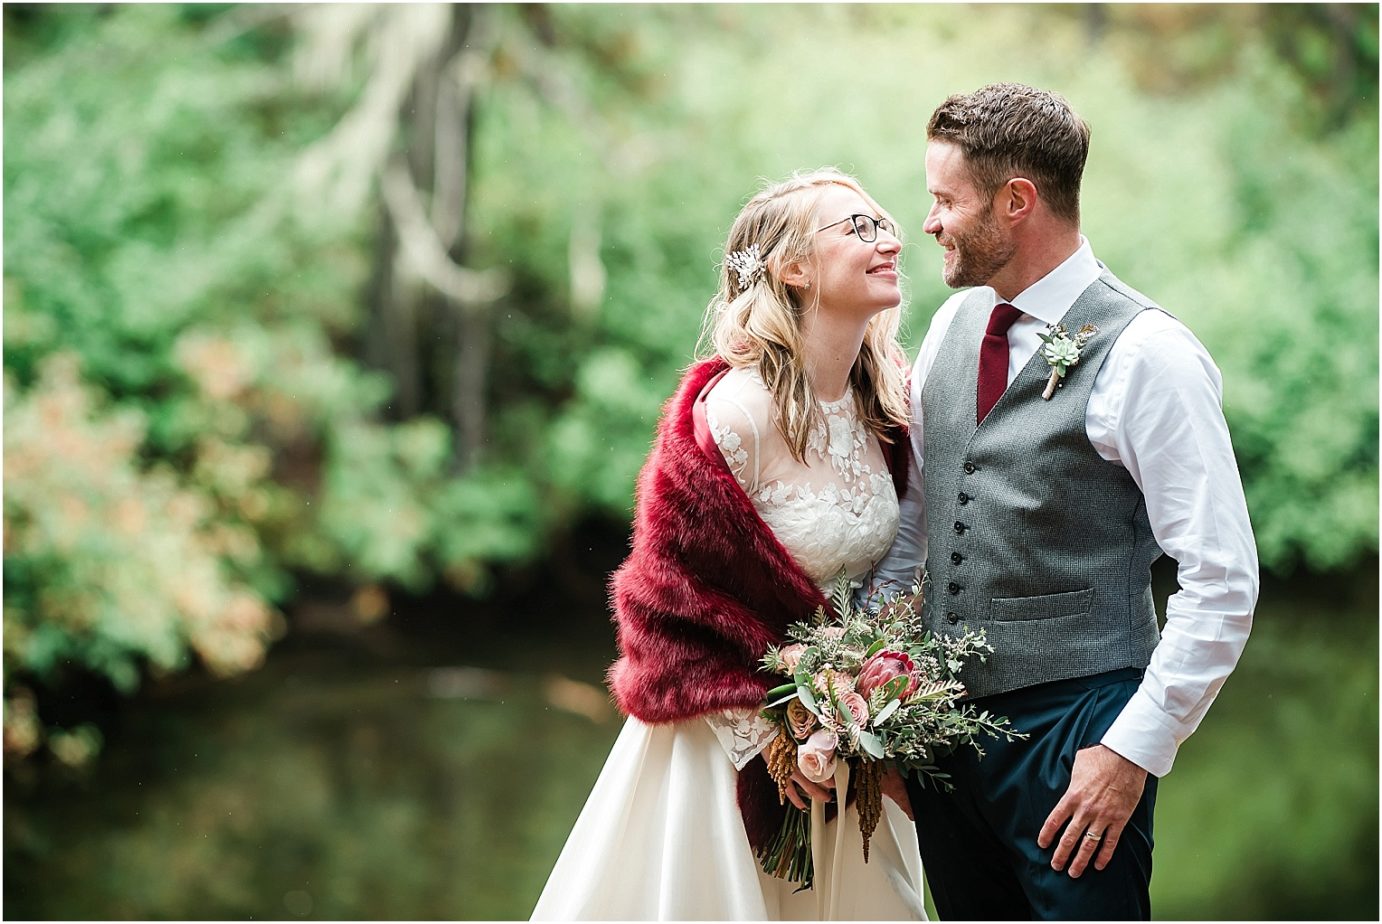 Intimate Leavenworth Elopement Rick and Tracey Leavenworth Photographer bride with fur shall